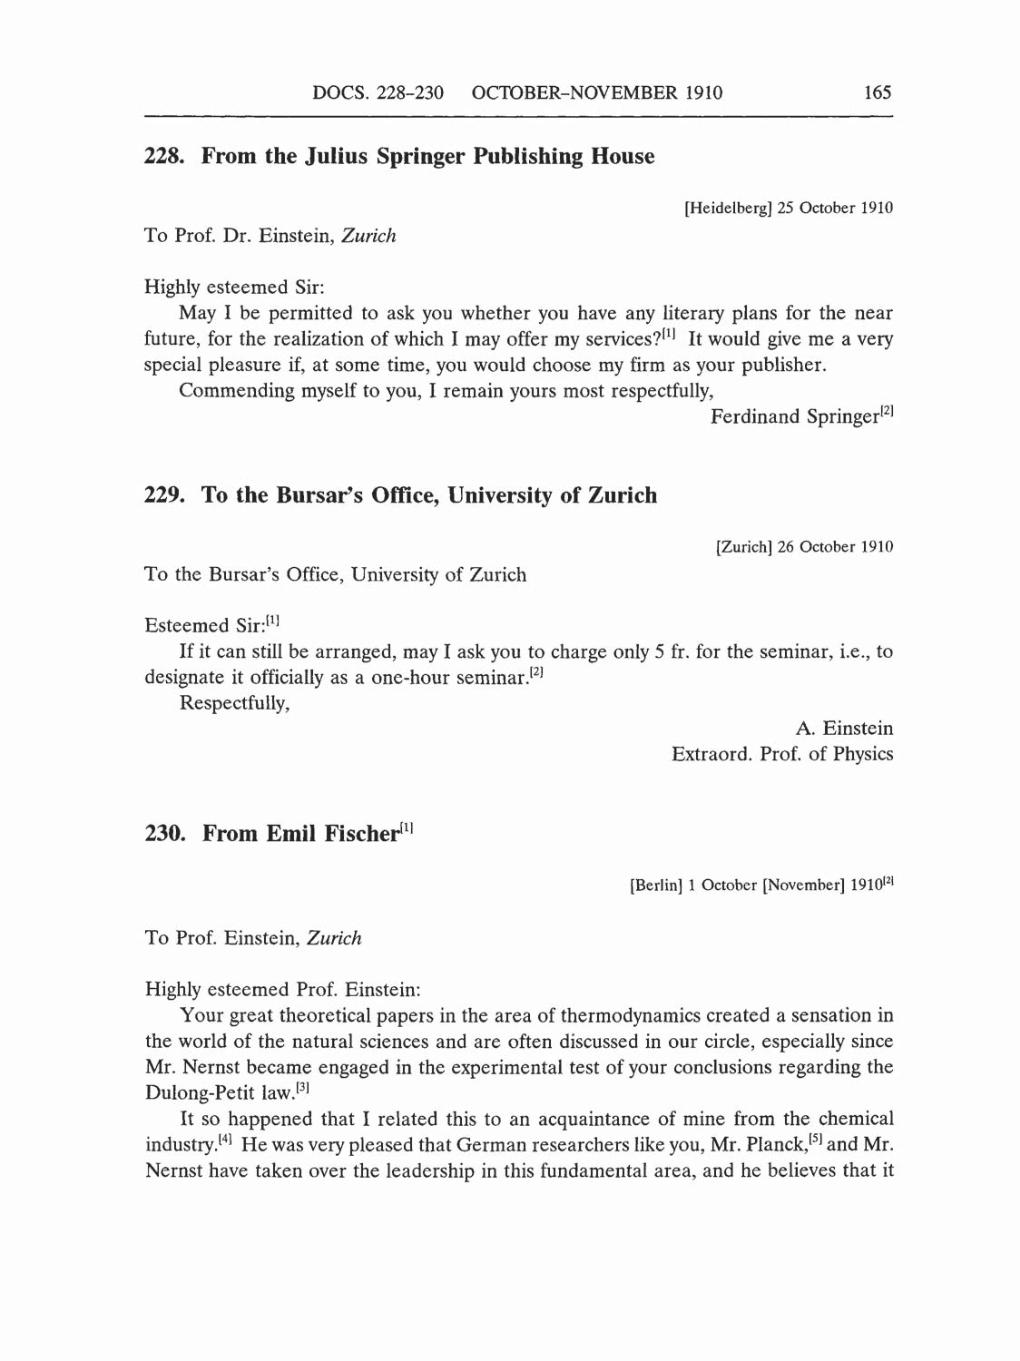 Volume 5: The Swiss Years: Correspondence, 1902-1914 (English translation supplement) page 165